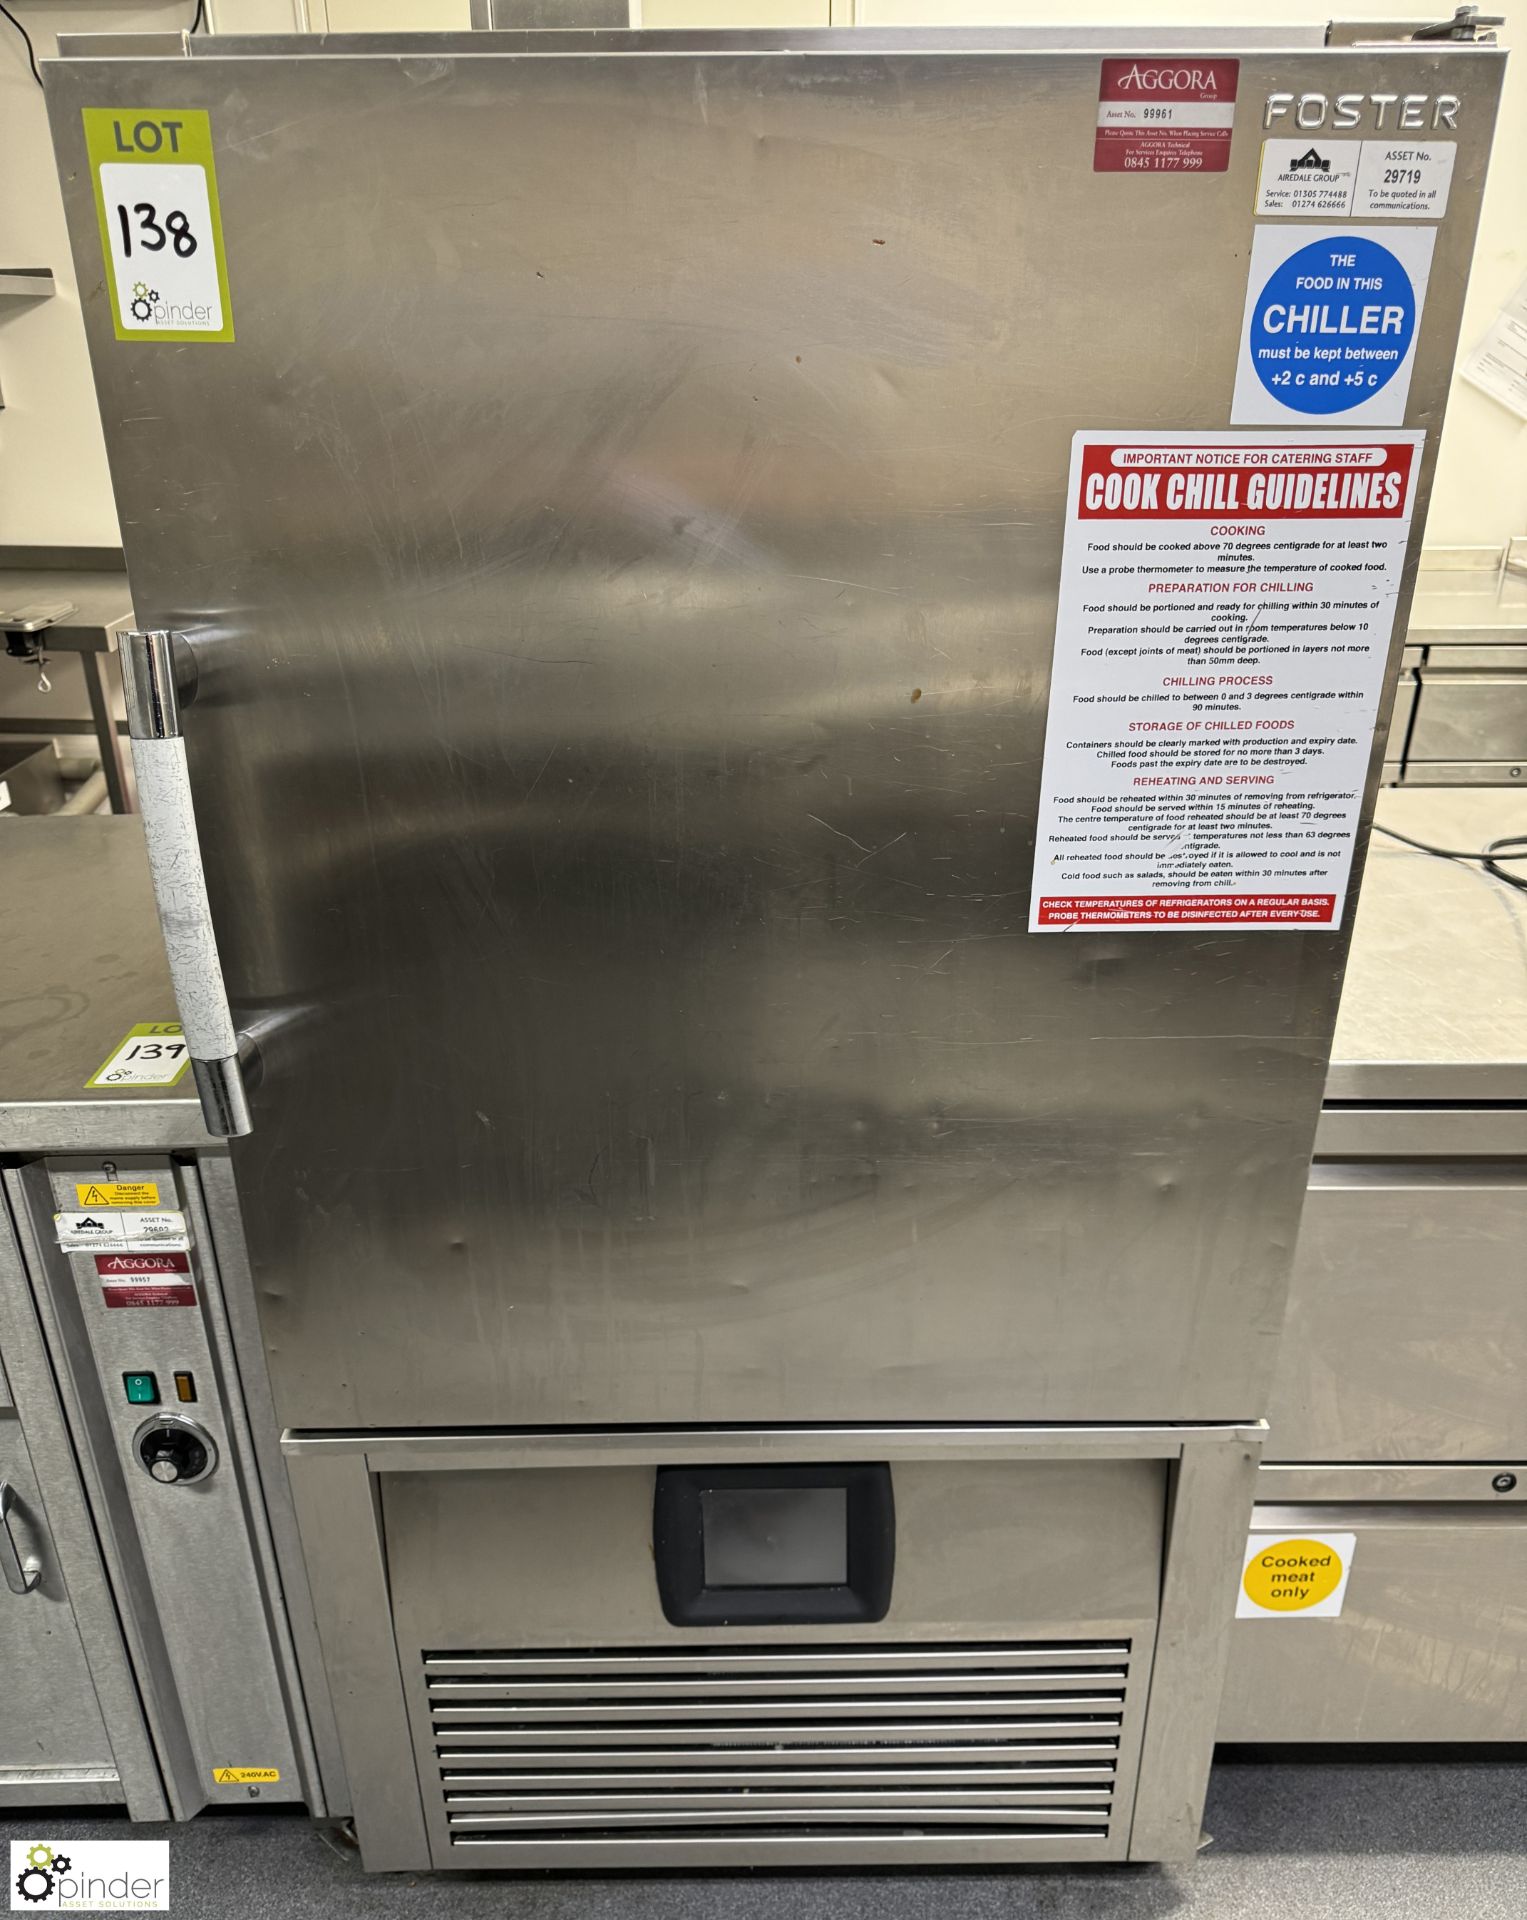 Foster BCC22-12 stainless steel mobile Blast Chiller/Freezer, 240volts, 750mm x 740mm x 1520mm (